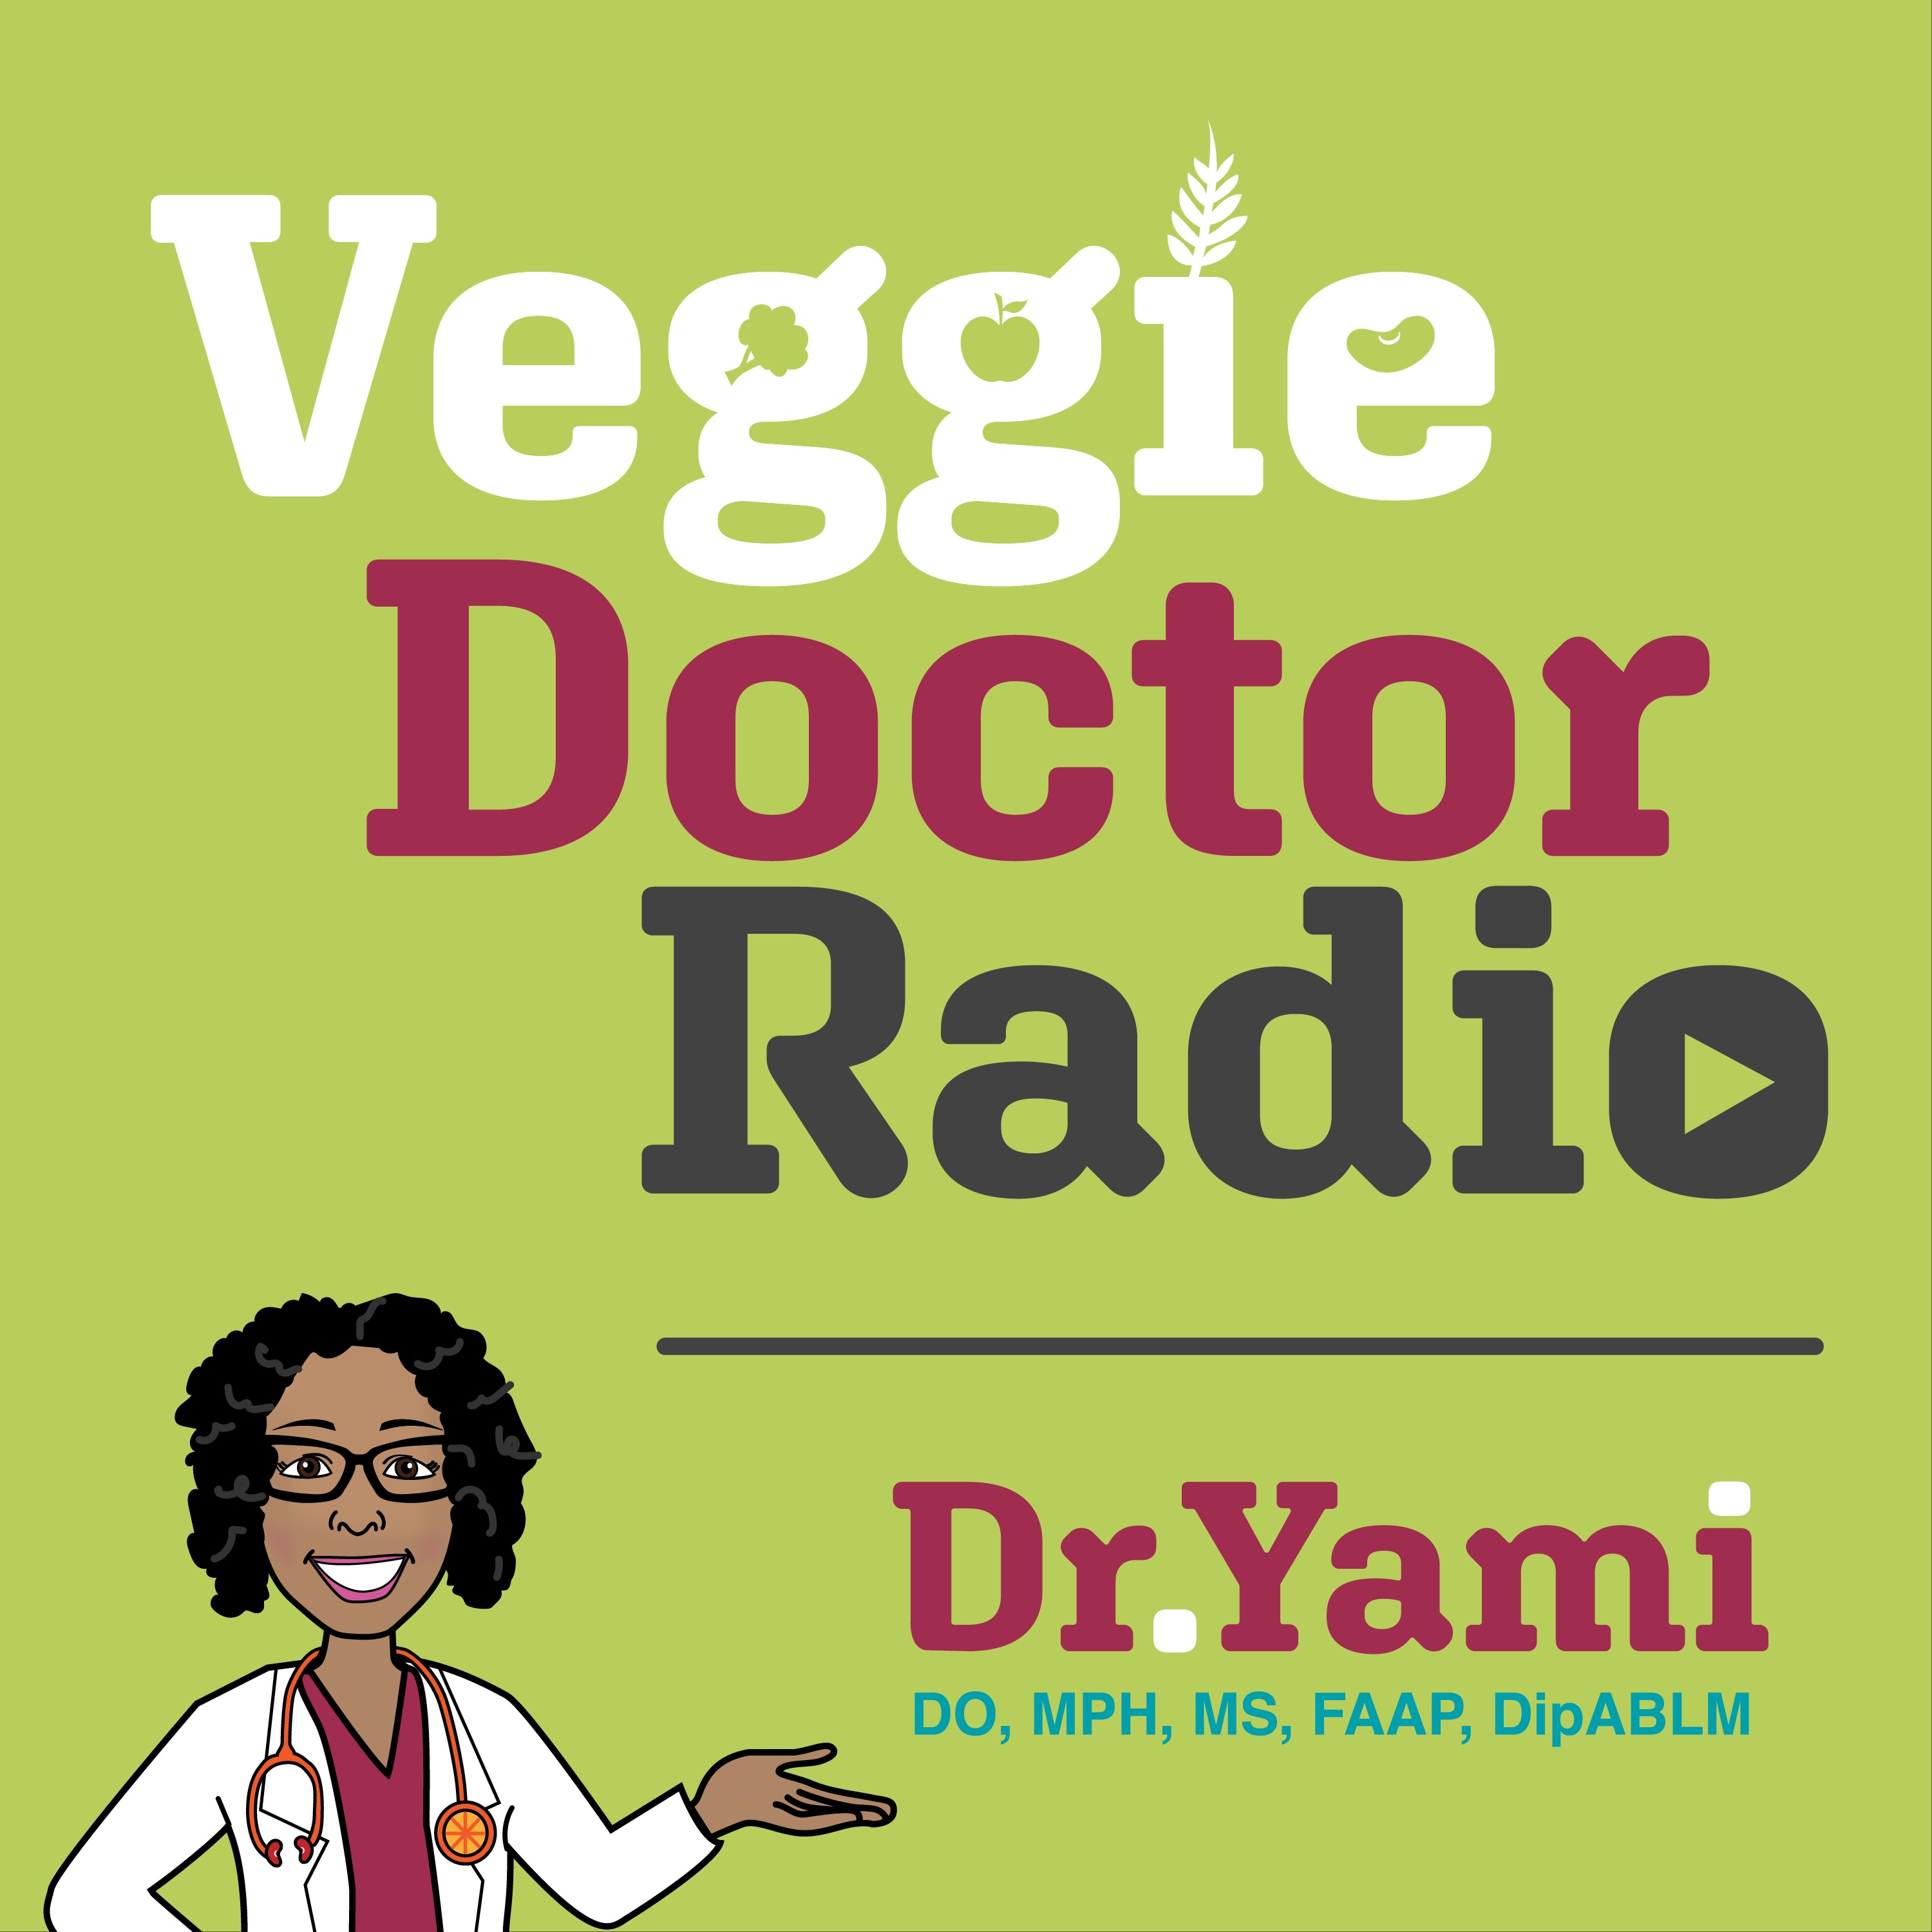 167: Is It Good for Weight Loss? (Veggie Doctor Radio)